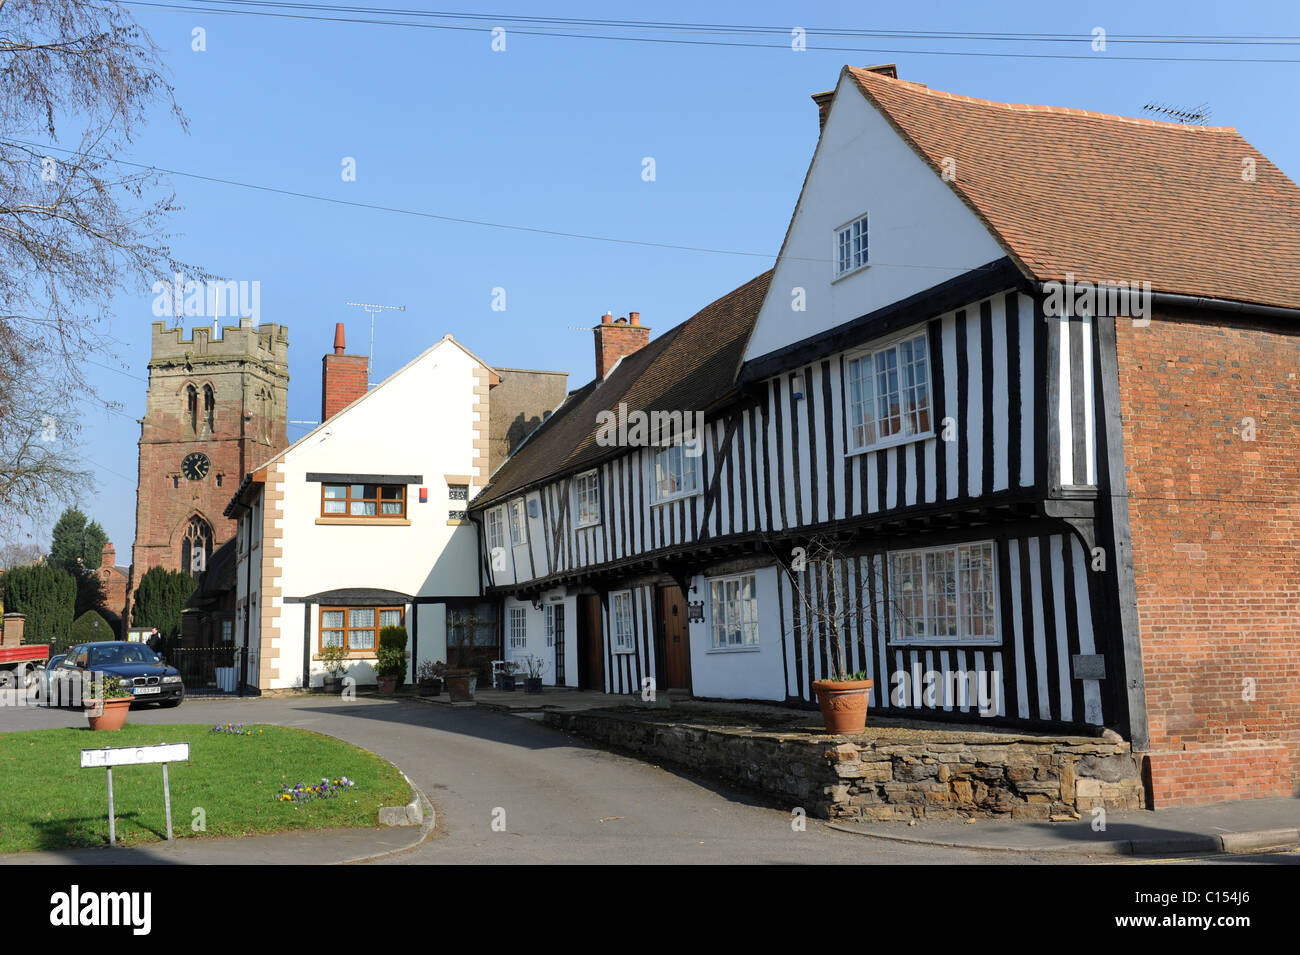 Guy Fawkes house in The village of Dunchurch In Warwickshire England Uk Stock Photo